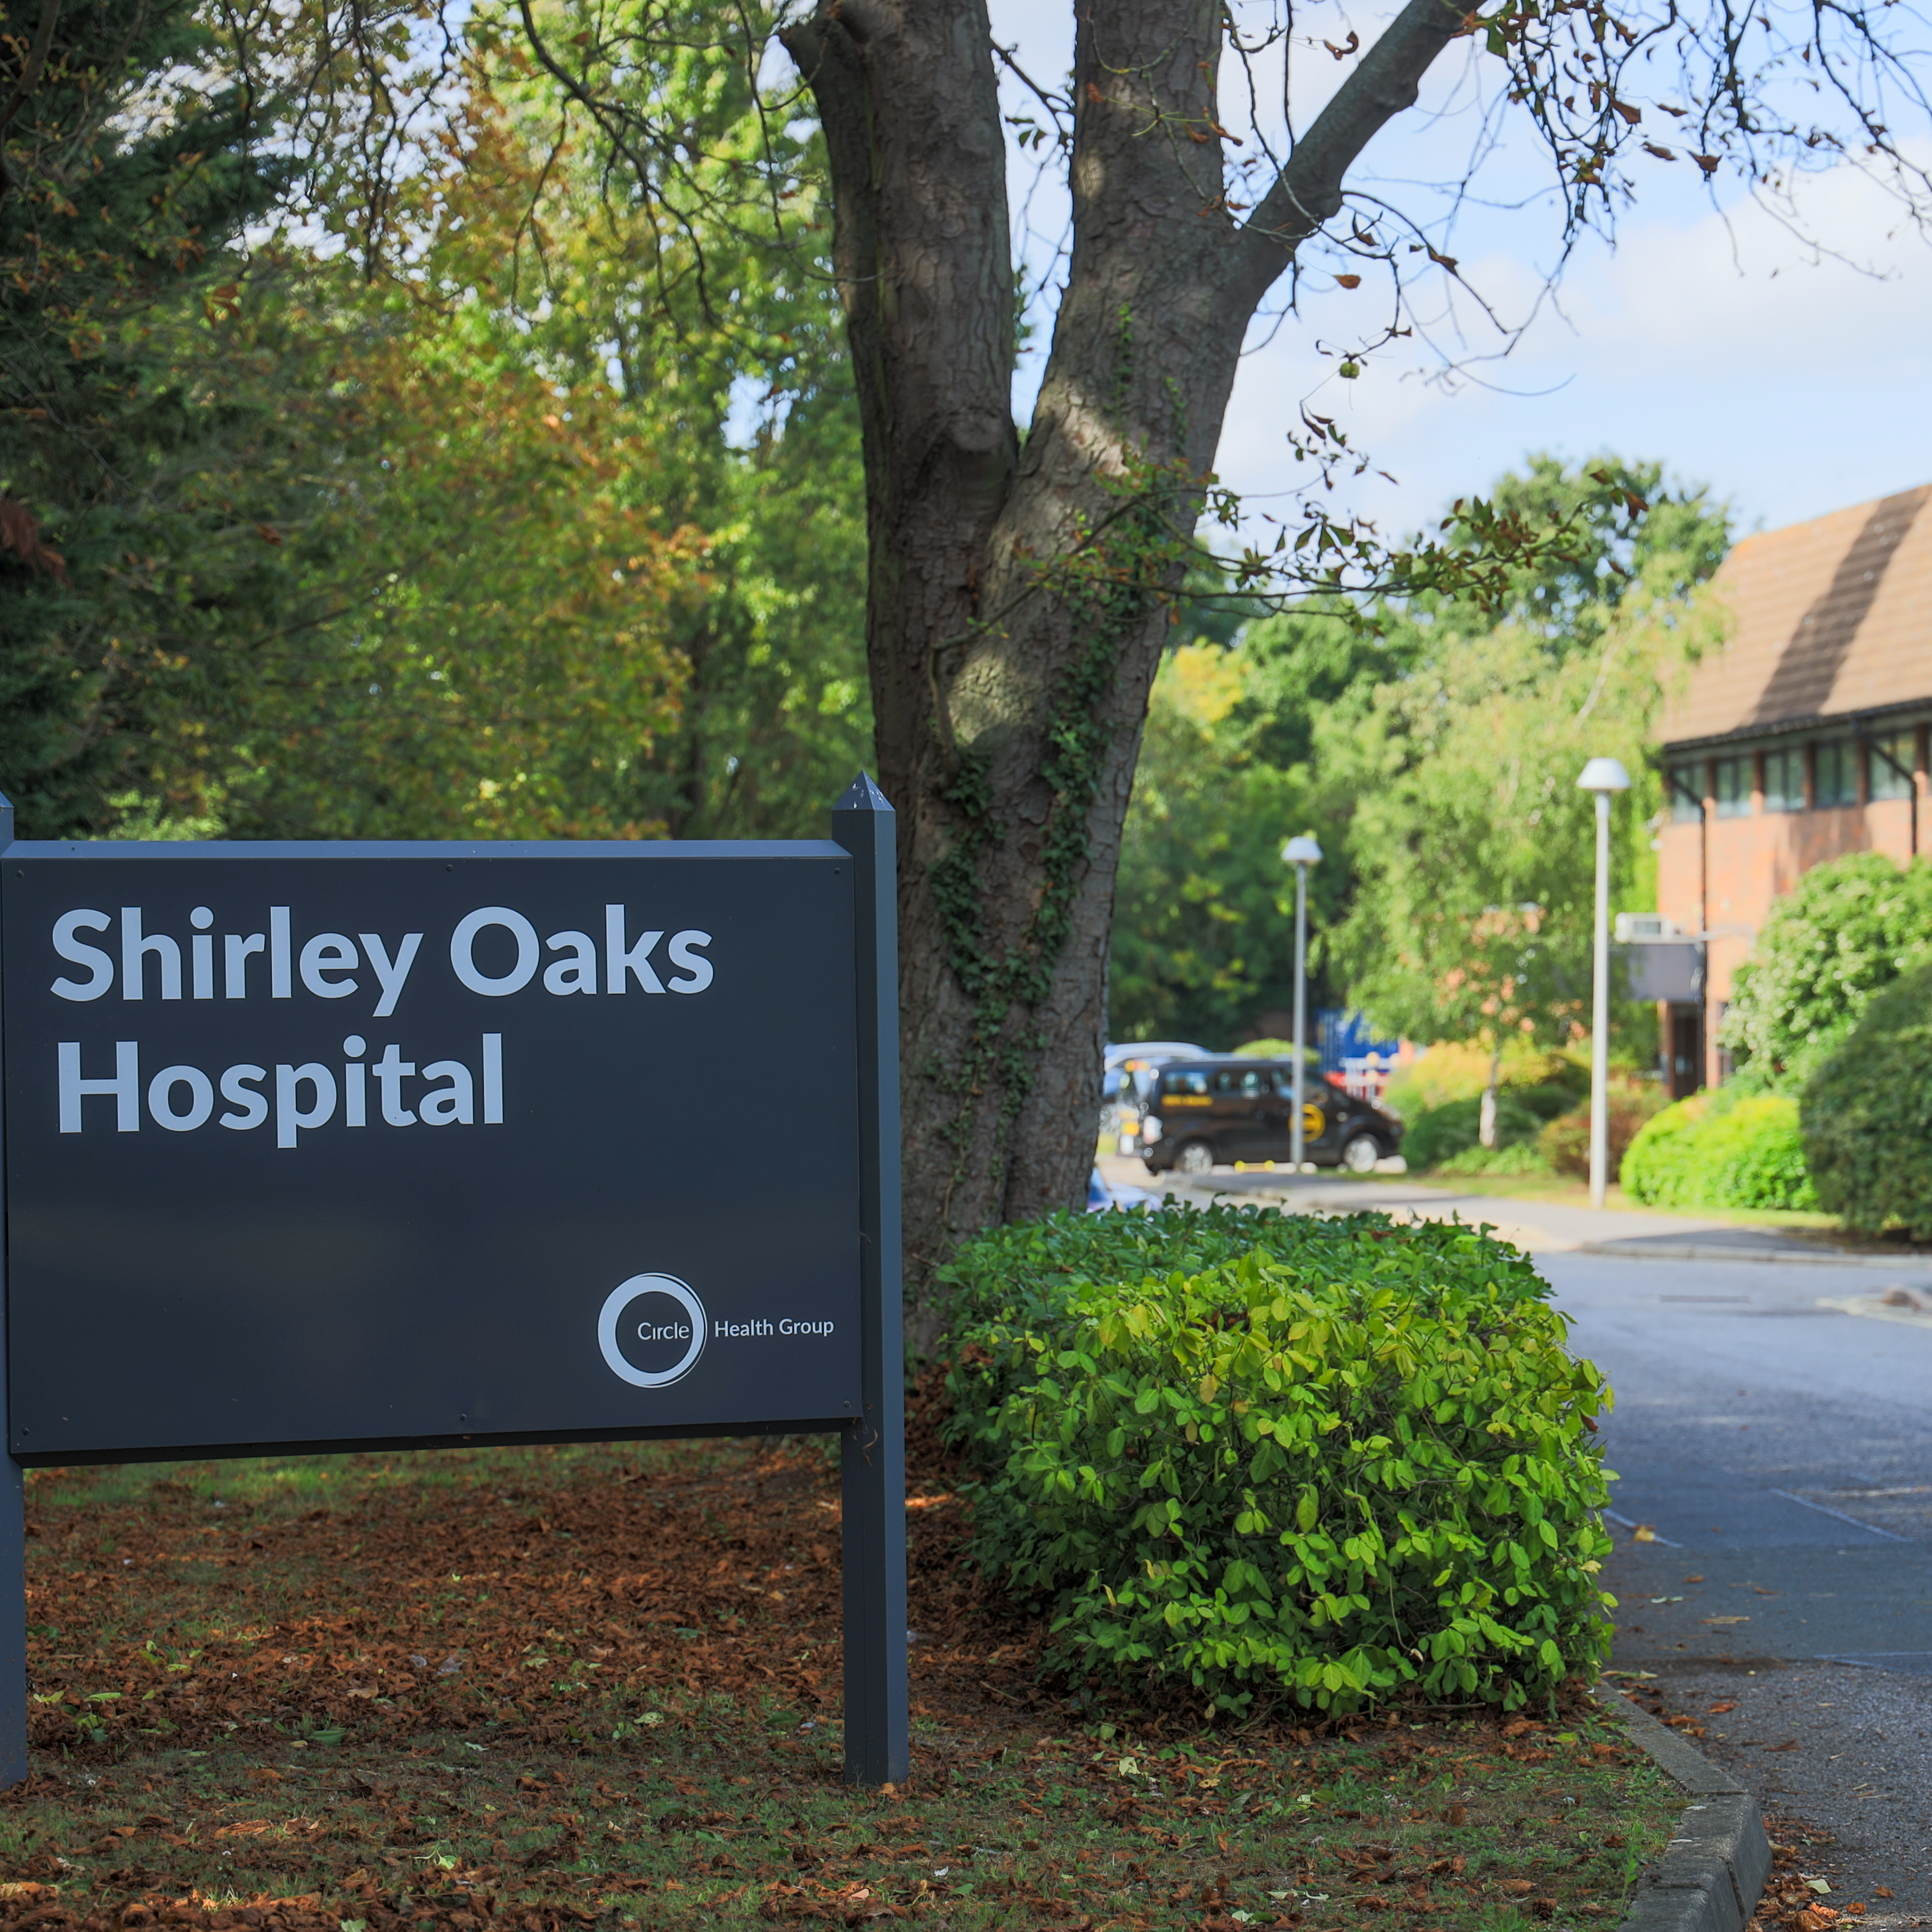 The Shirley Oaks Hospital (part of Circle Health Group)